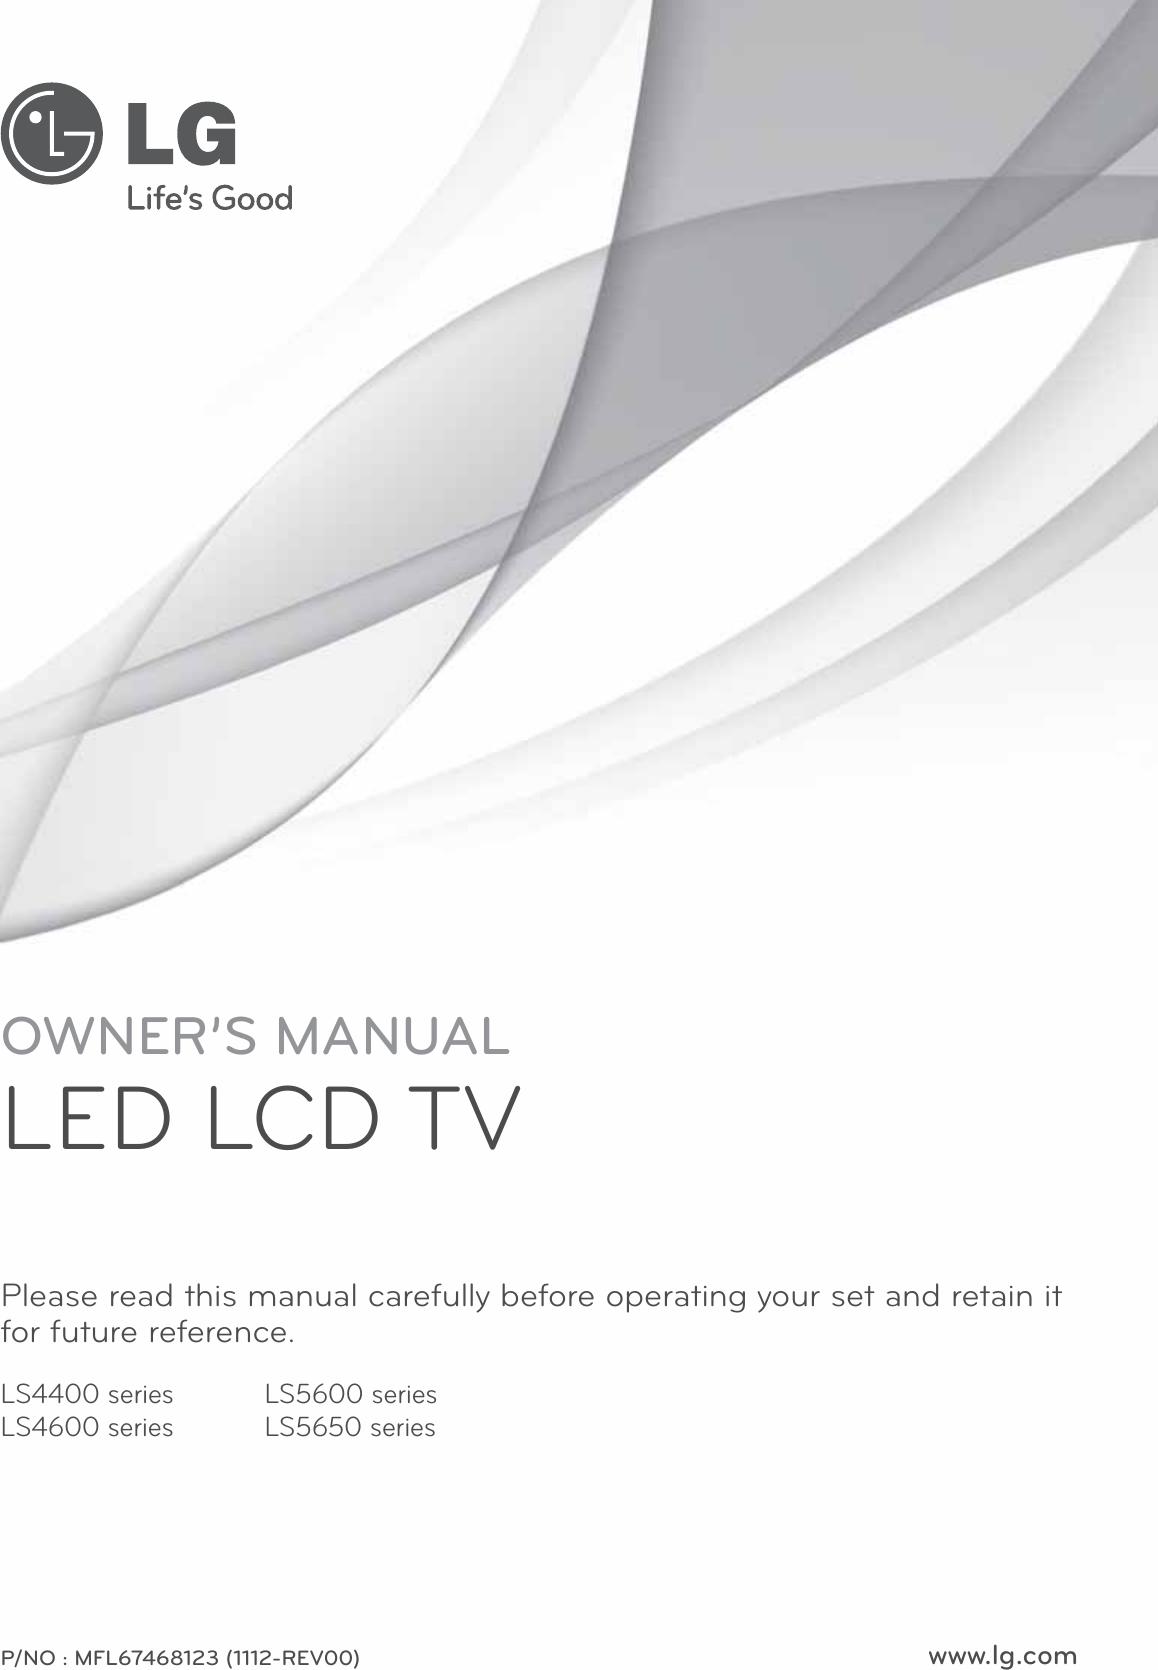 www.lg.comOWNER’S MANUALLED LCD TVPlease read this manual carefully before operating your set and retain it for future reference.P/NO : MFL67468123 (1112-REV00)LS4400 seriesLS4600 seriesLS5600 seriesLS5650 series